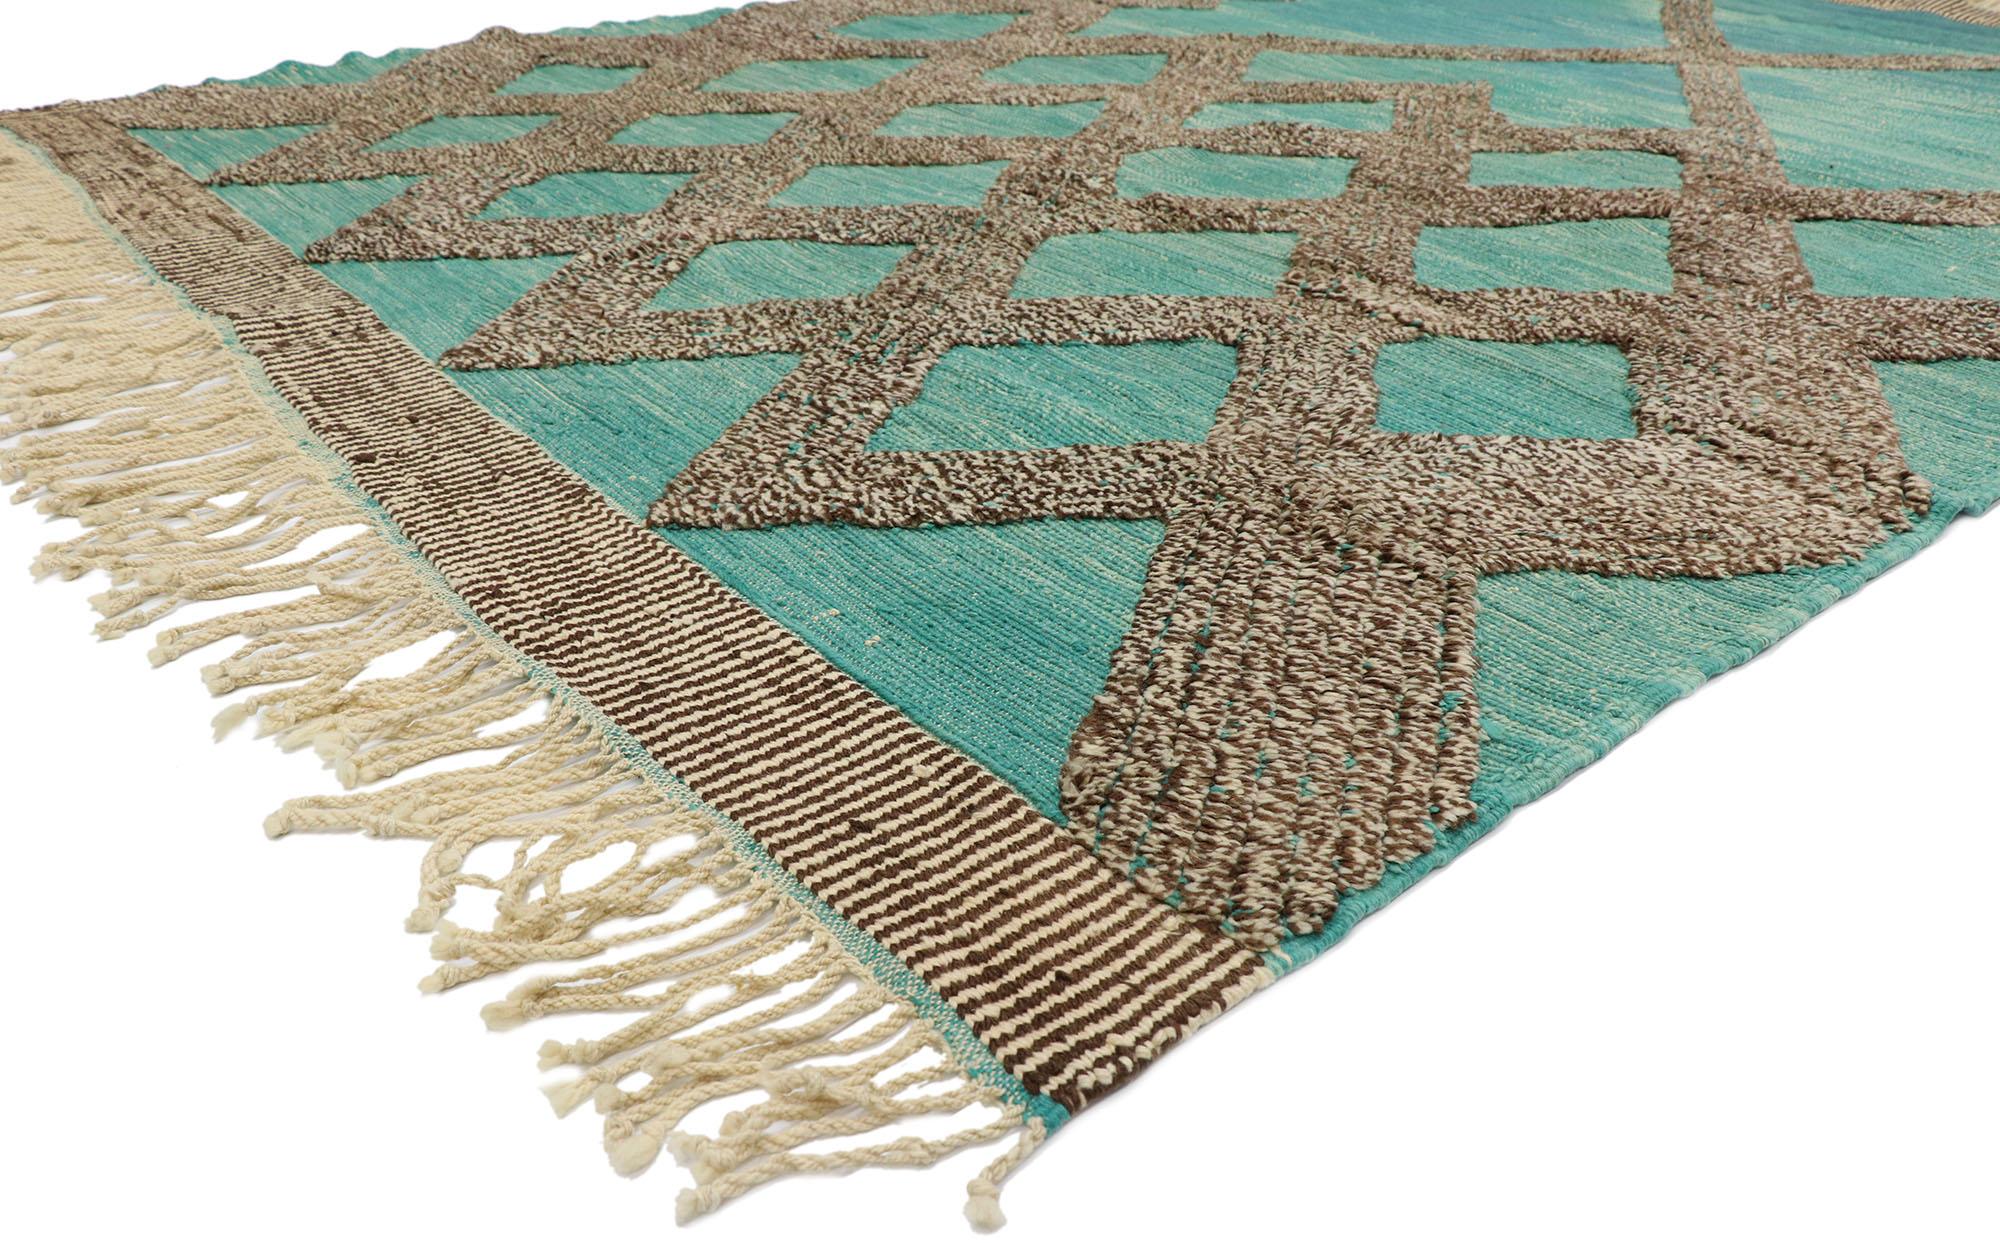 21162 New Contemporary Berber Moroccan Souf Kilim Rug with Coastal Boho Style 08'02 x 11'06. With a strong sense of dimensionality and asymmetry, this hand-woven contemporary Berber Moroccan Kilim rug is engaging, yet well balanced creating a